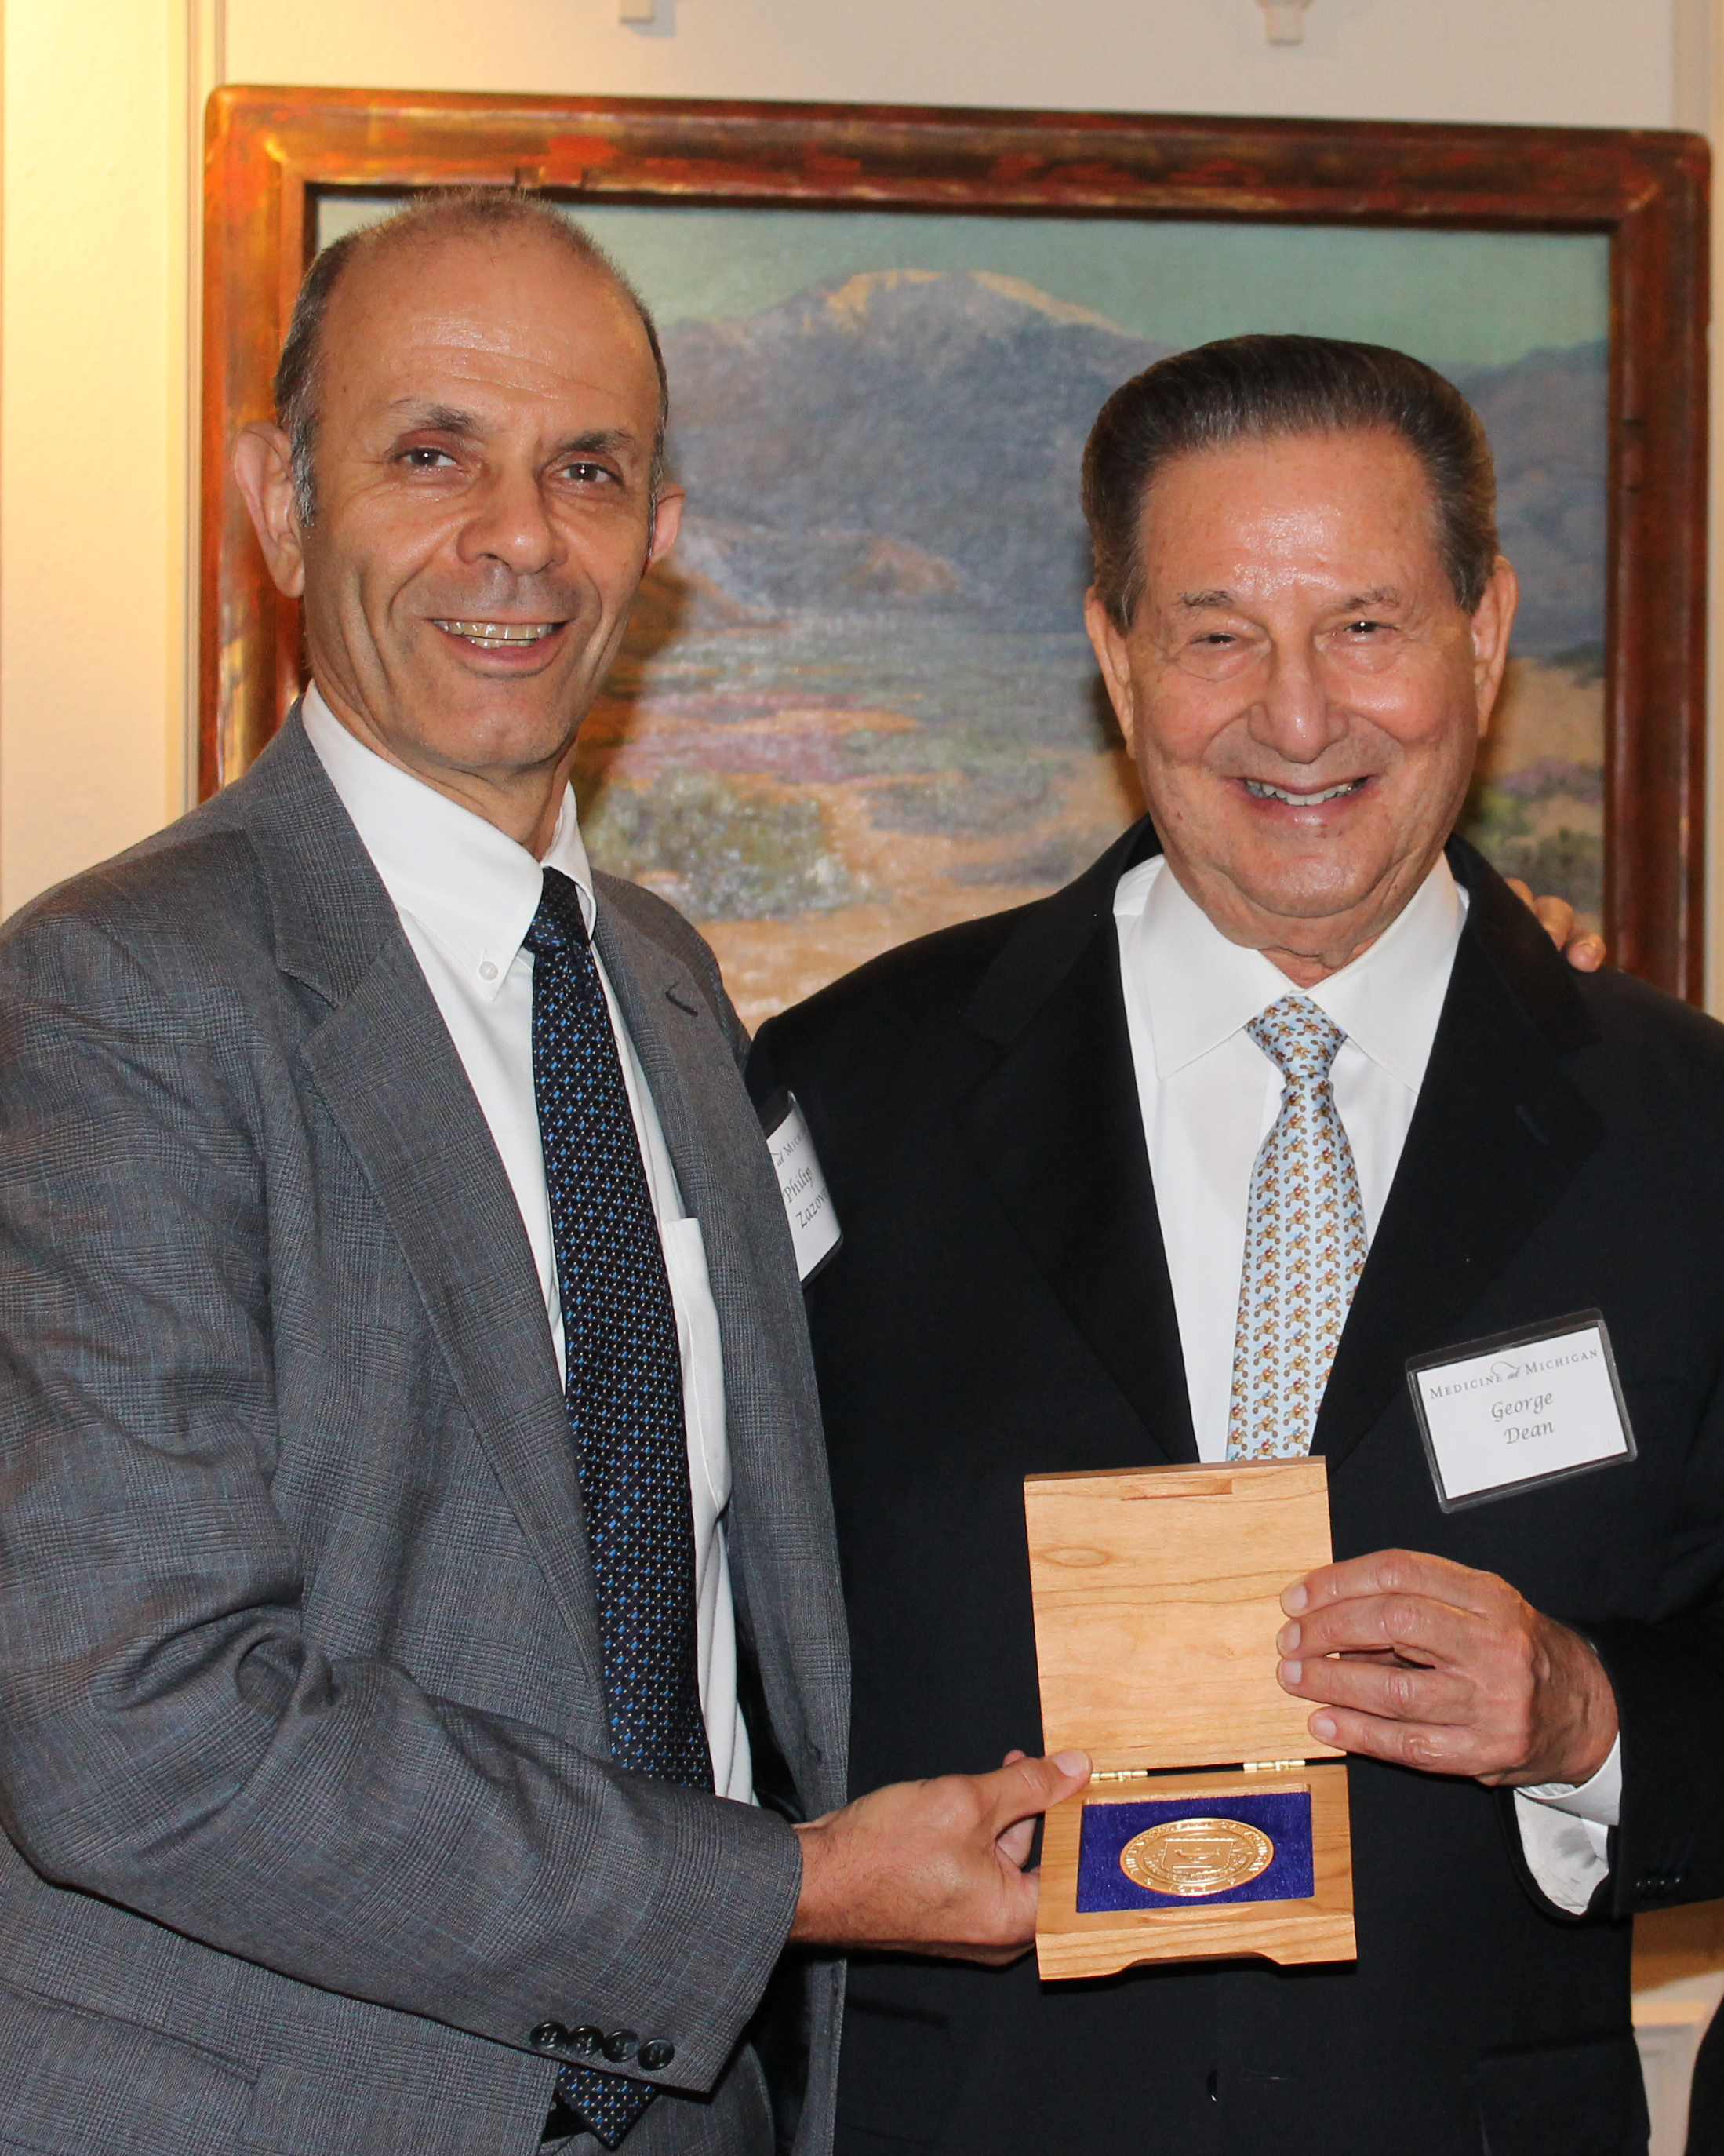 Two men in suits hold a gold medallion in a box between them. They are smiling at the camera. 